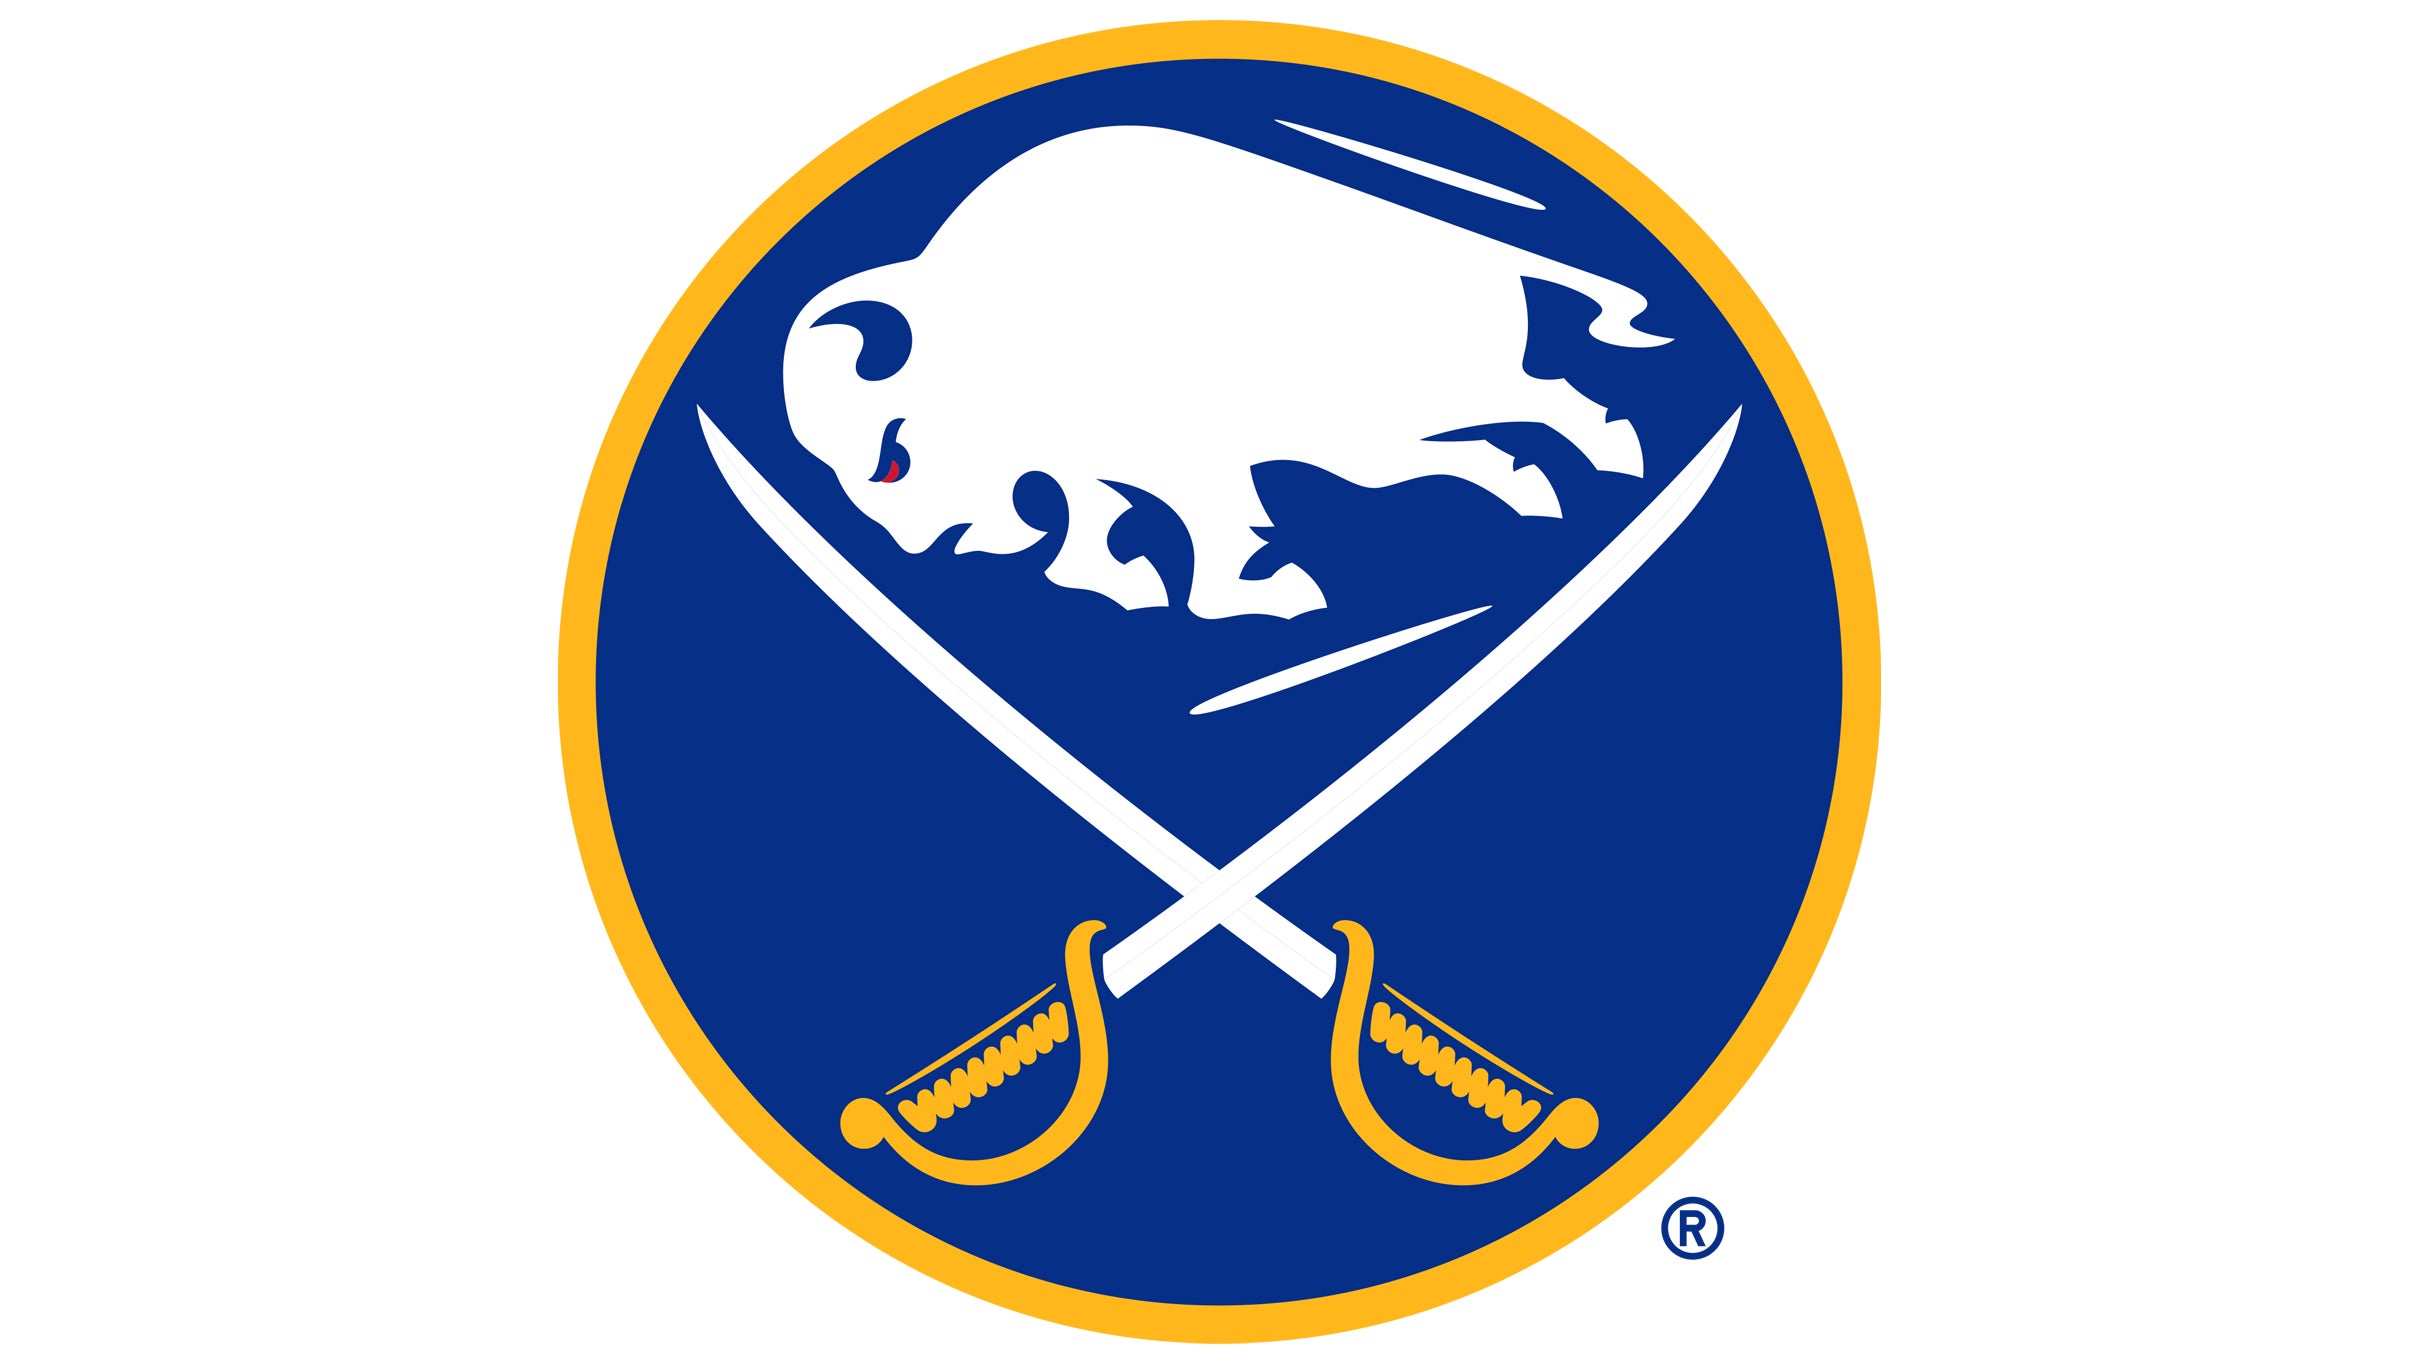 Buffalo Sabres vs. Detroit Red Wings in Buffalo promo photo for Resale presale offer code